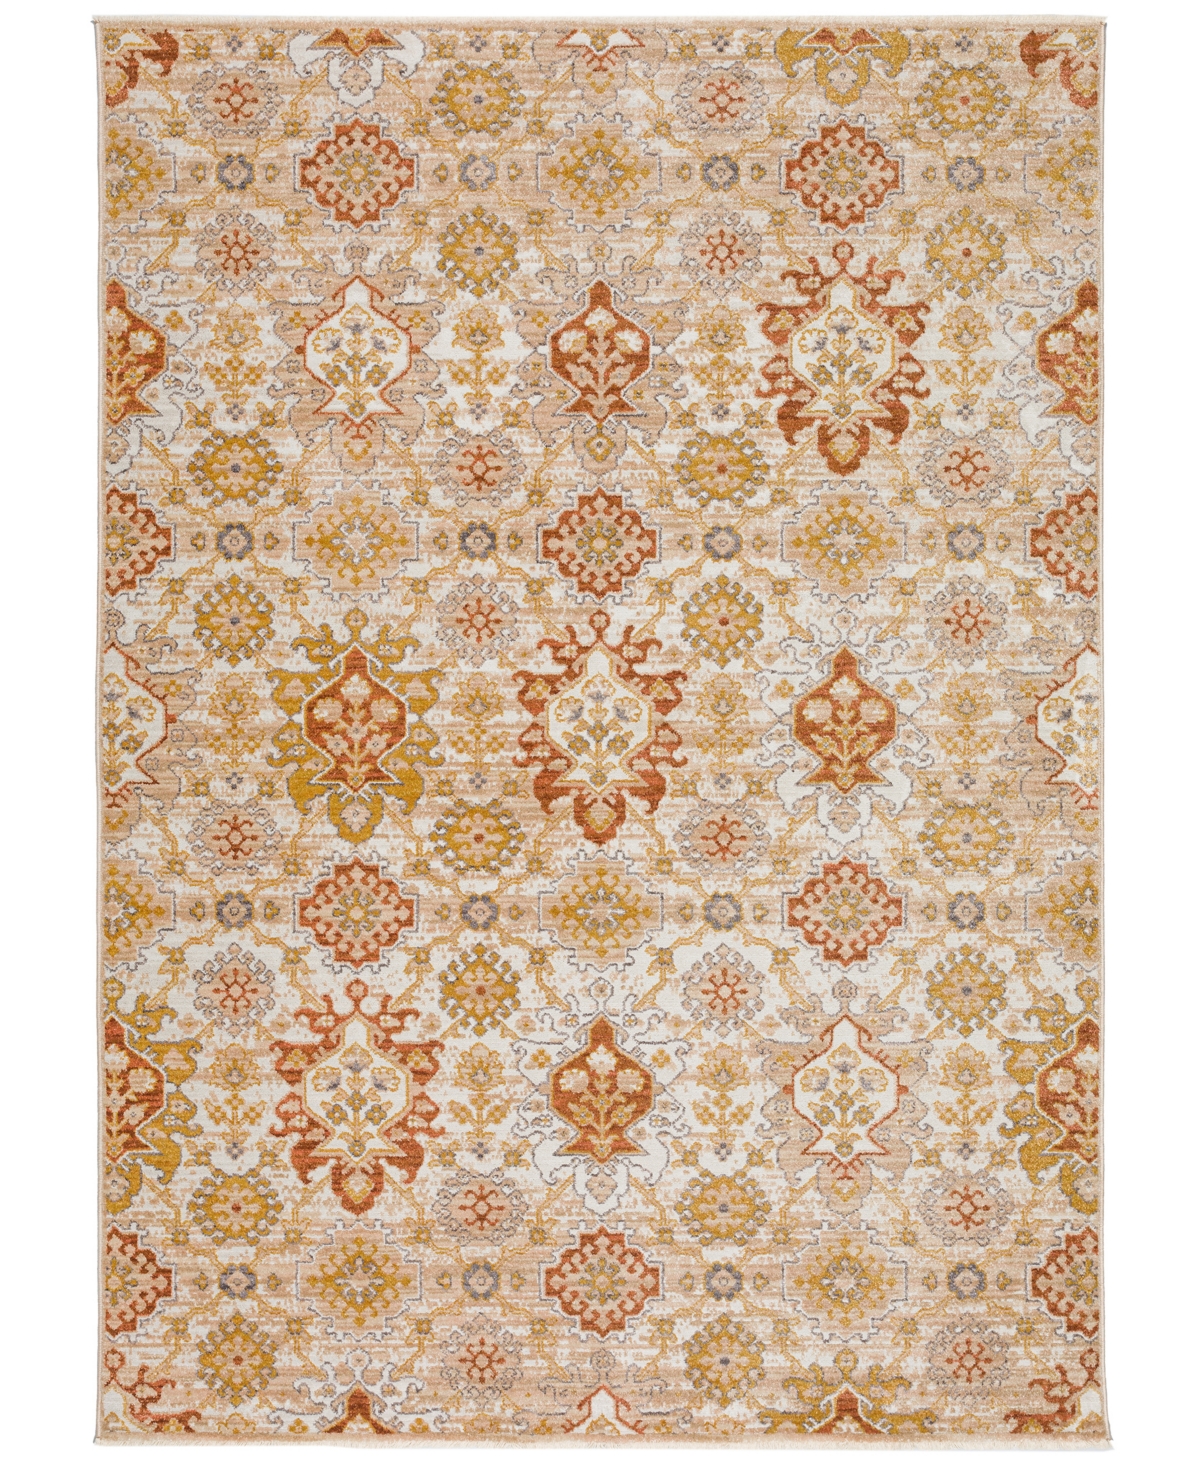 D Style Sergey Sgy7 7'10" X 10' Area Rug In Beige